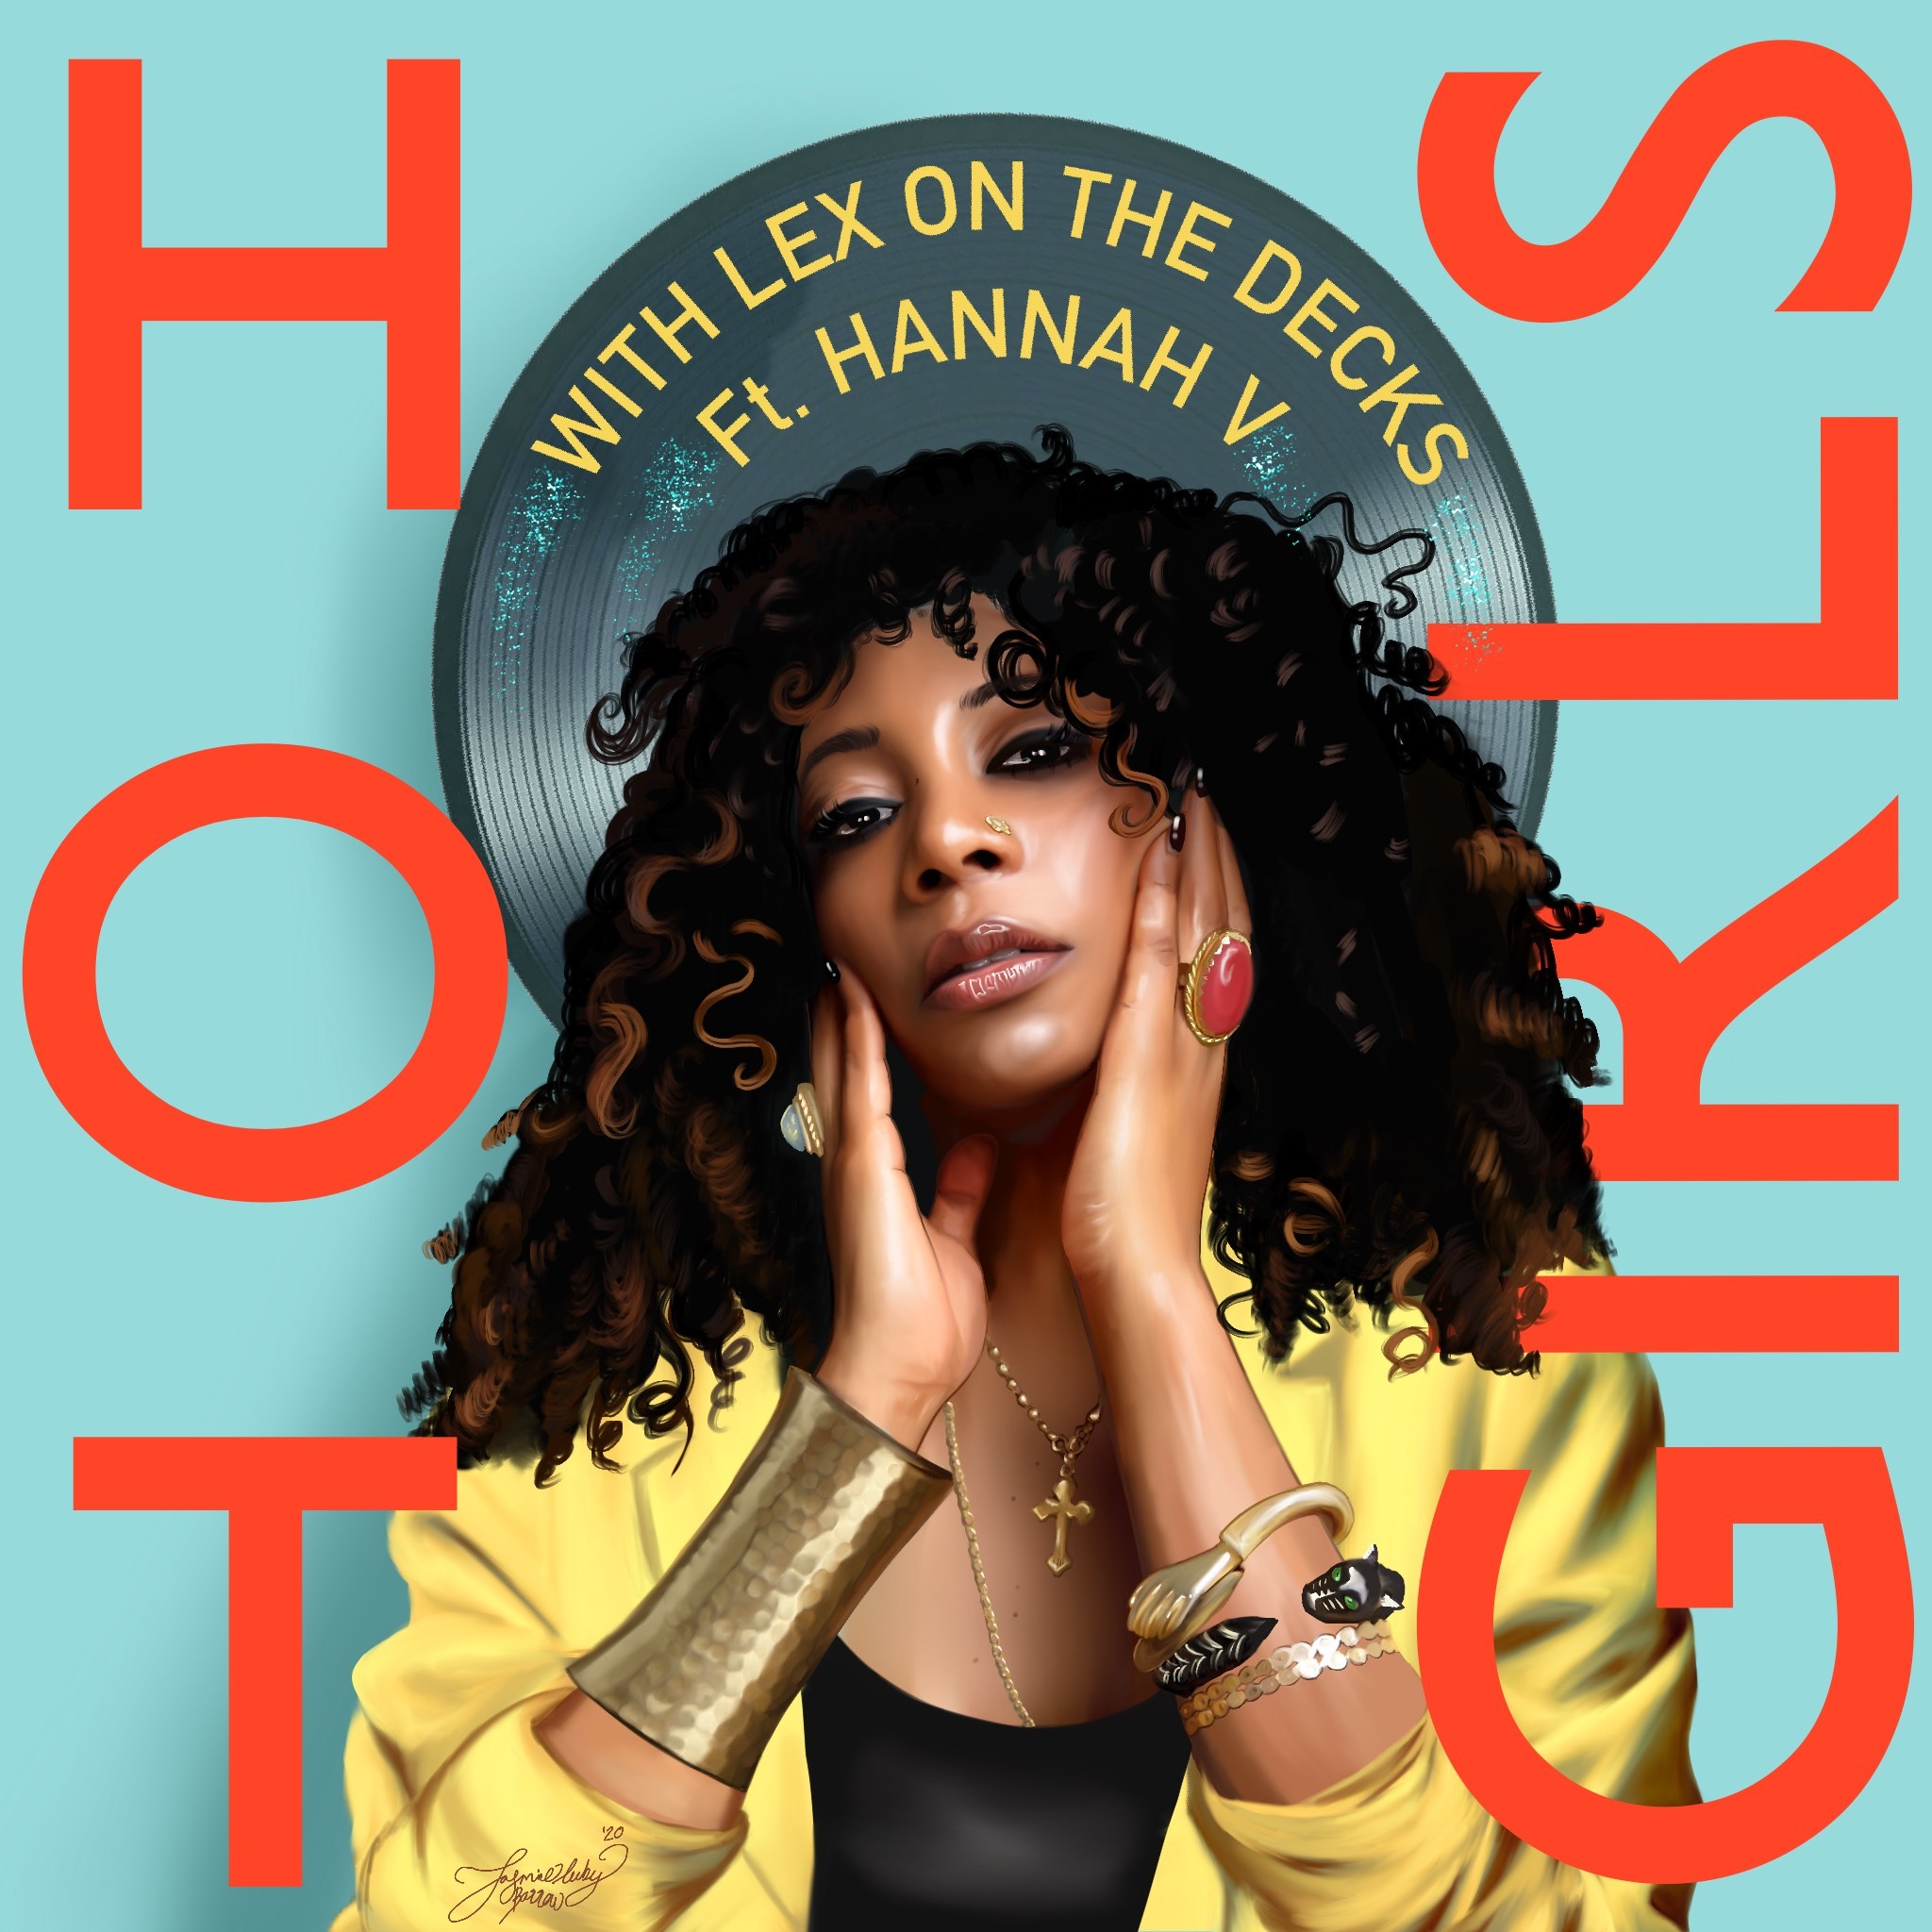 Hot Girls: Touring, Jazz, and Studio Sessions with JP Cooper and Stormzy, with Hannah V